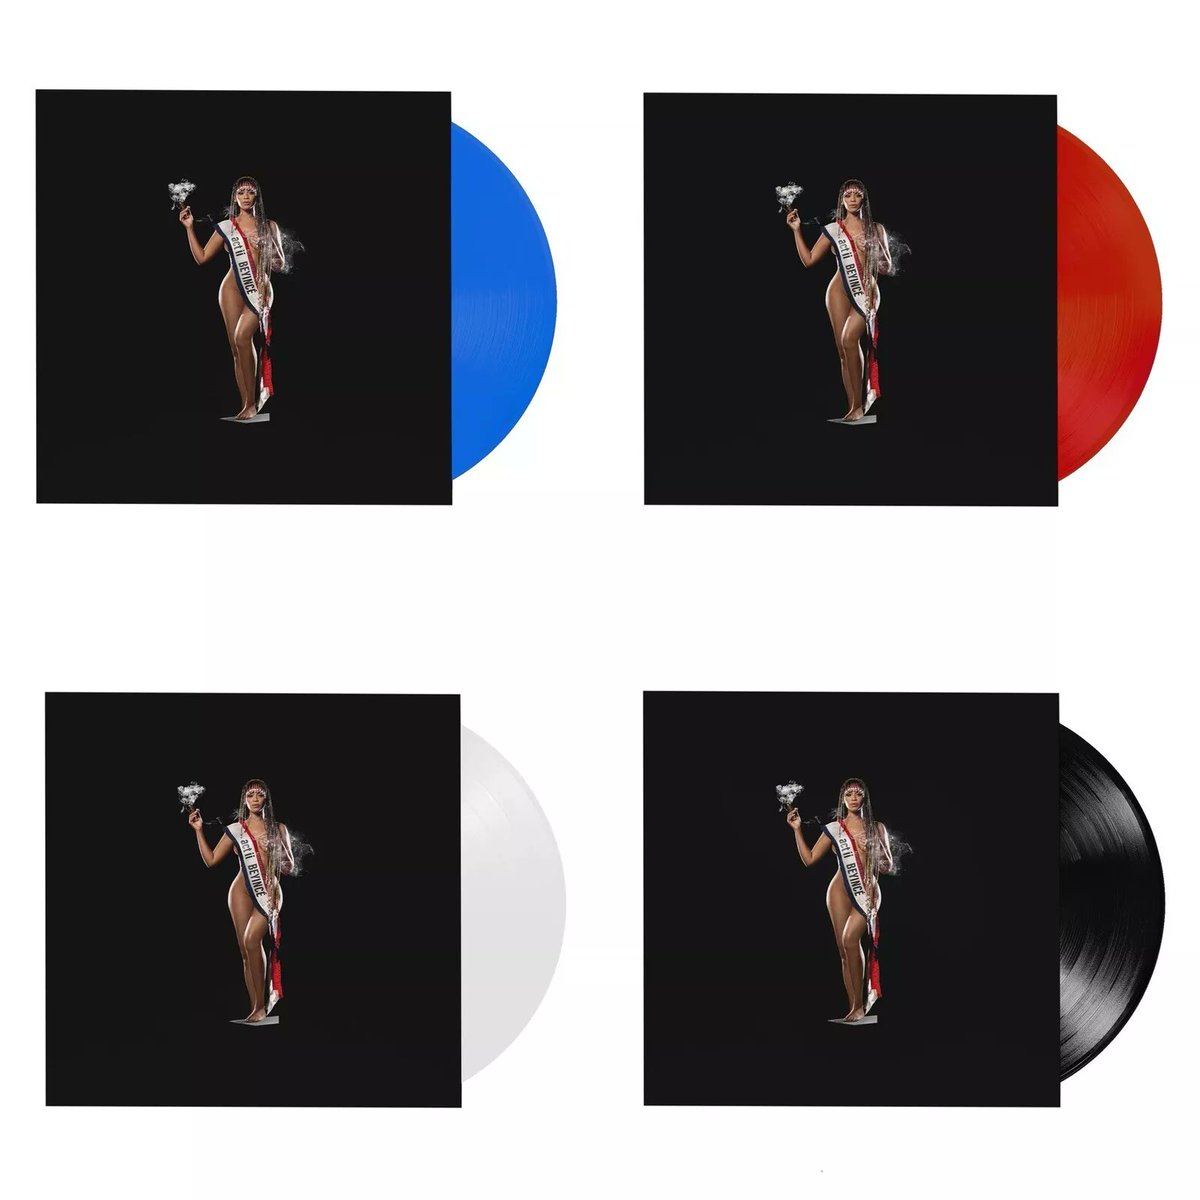 Queen B's country-conquering opus finally gets the fancy vinyl editions it deserves! Snap one up here! - resident-music.com/productdetails…